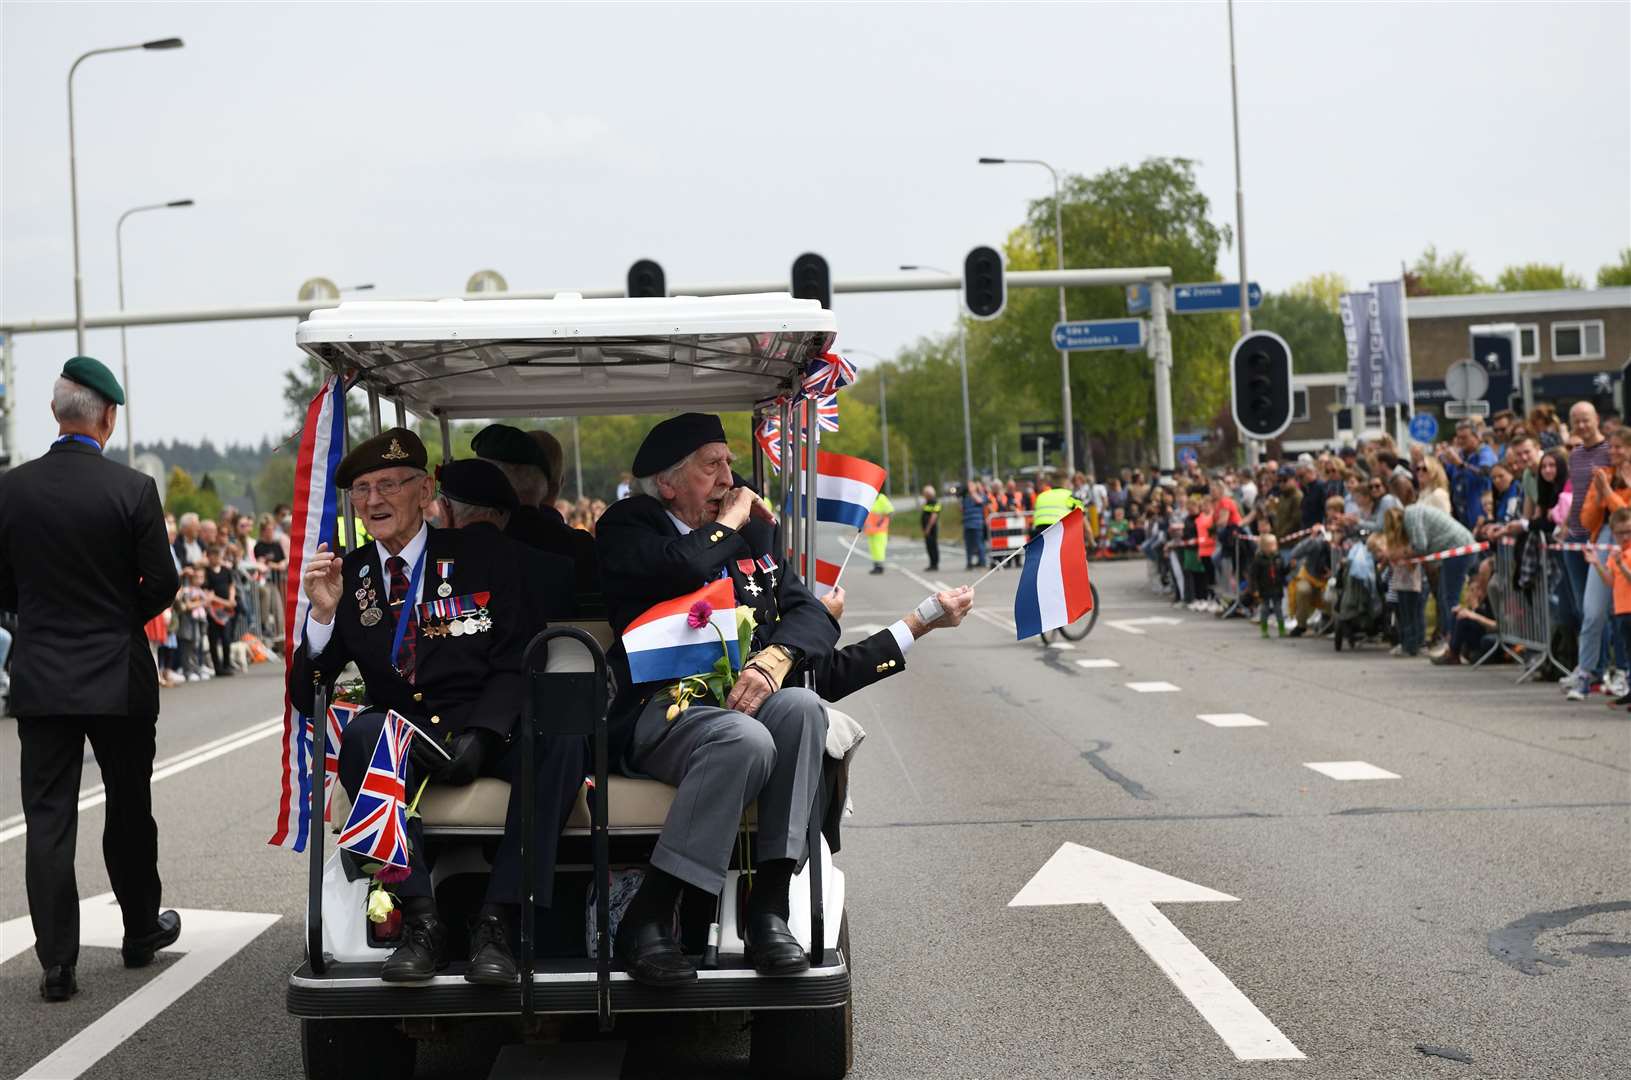 Robbie Larnach (left) in the Netherlands with the Taxi Charity for the Dutch liberation parade last year. The charity says Robbie will be greatly missed by its volunteer drivers and supporters.